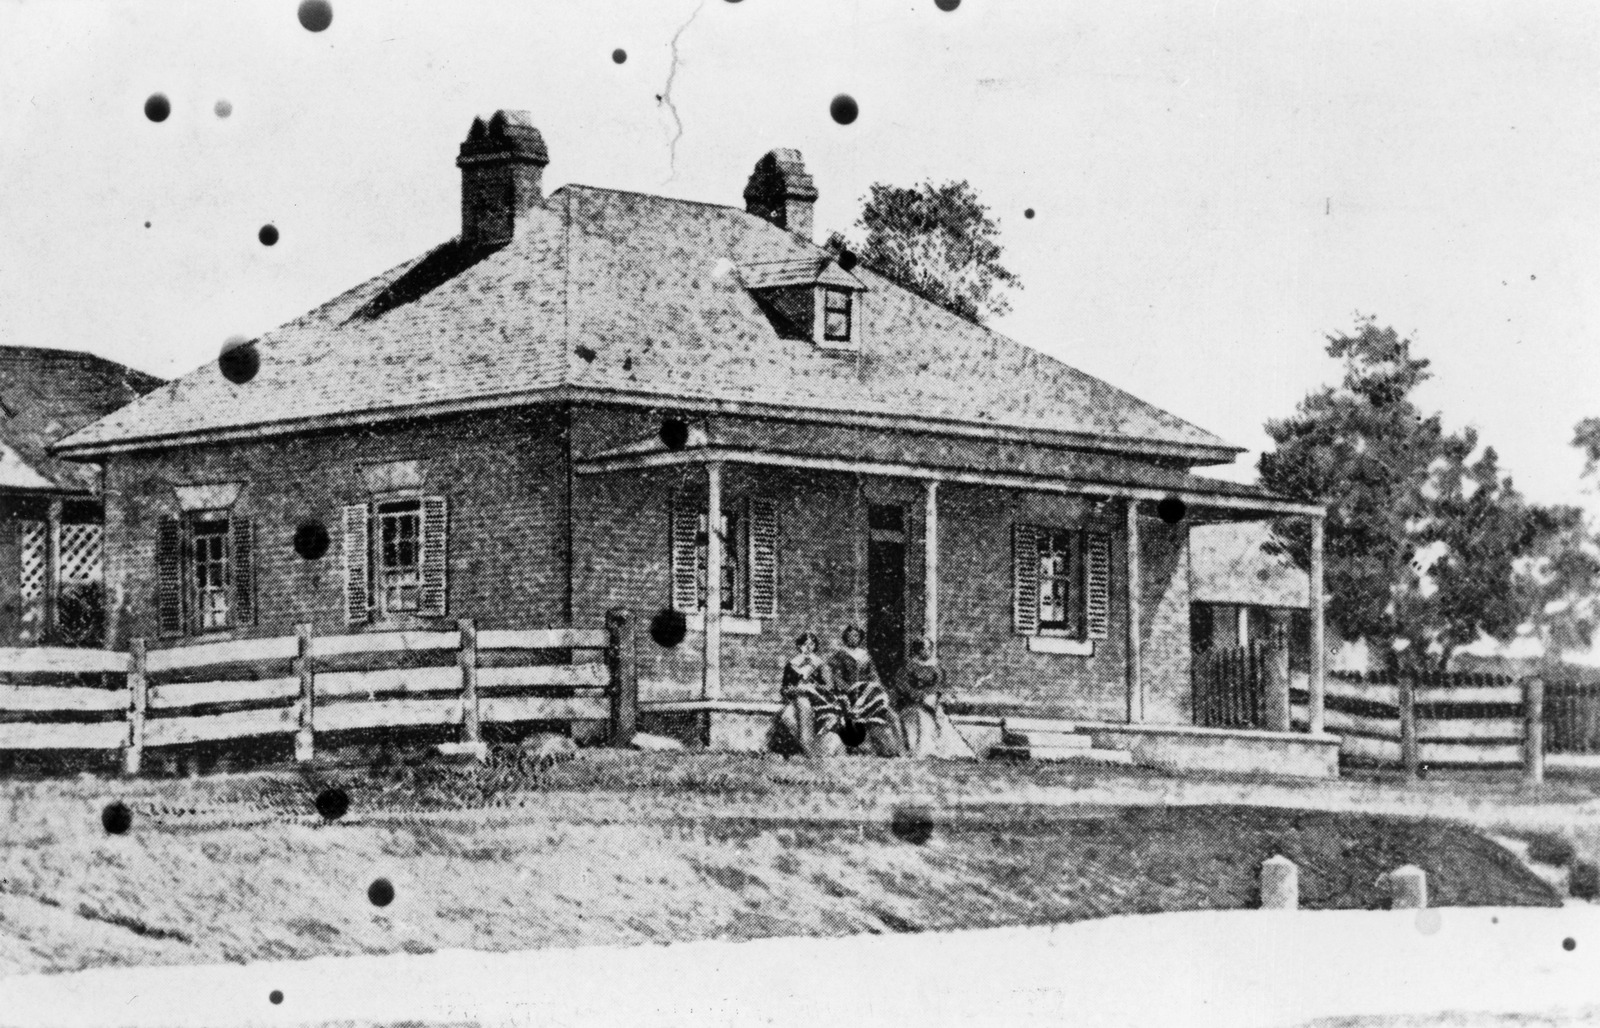 Andrew Petrie's house at the corner of Queen and Wharf Streets, Brisbane, ca. 1859